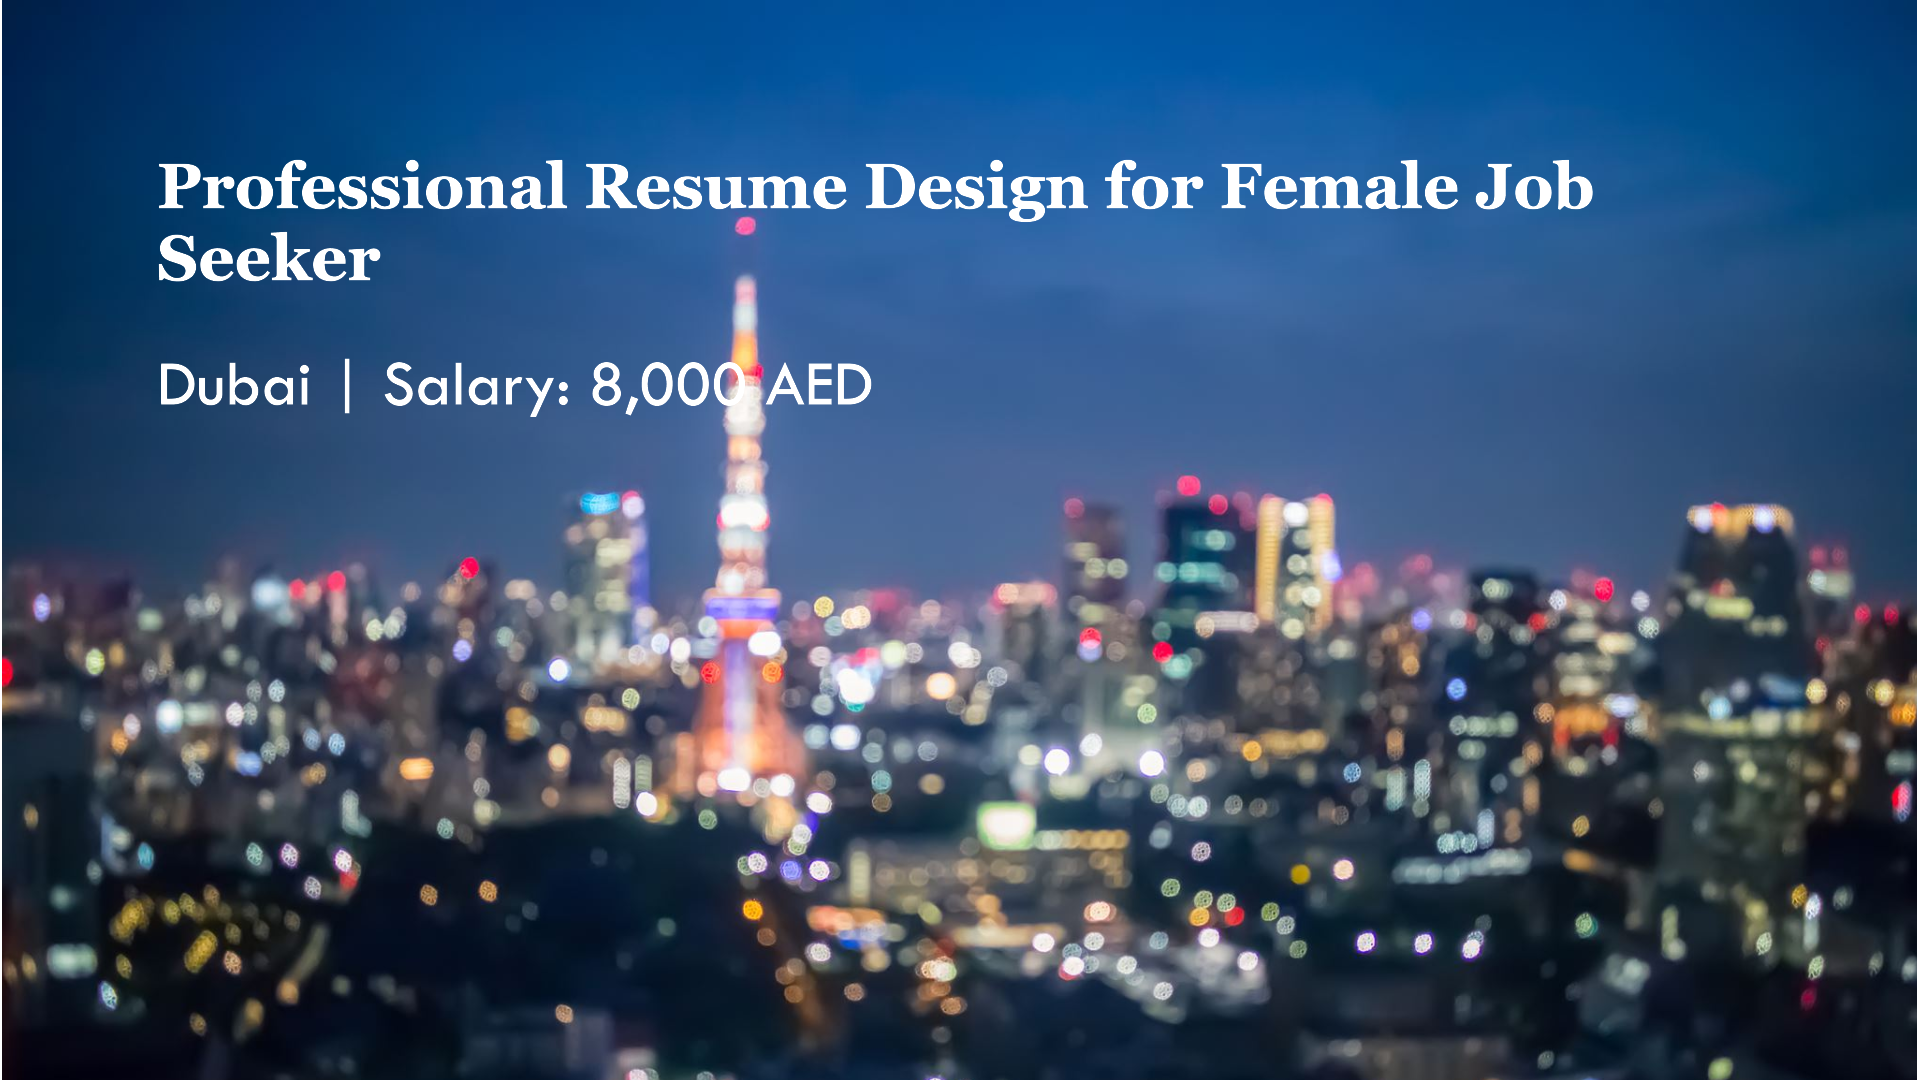 jobs in dubai for female with salary 8,000 AED